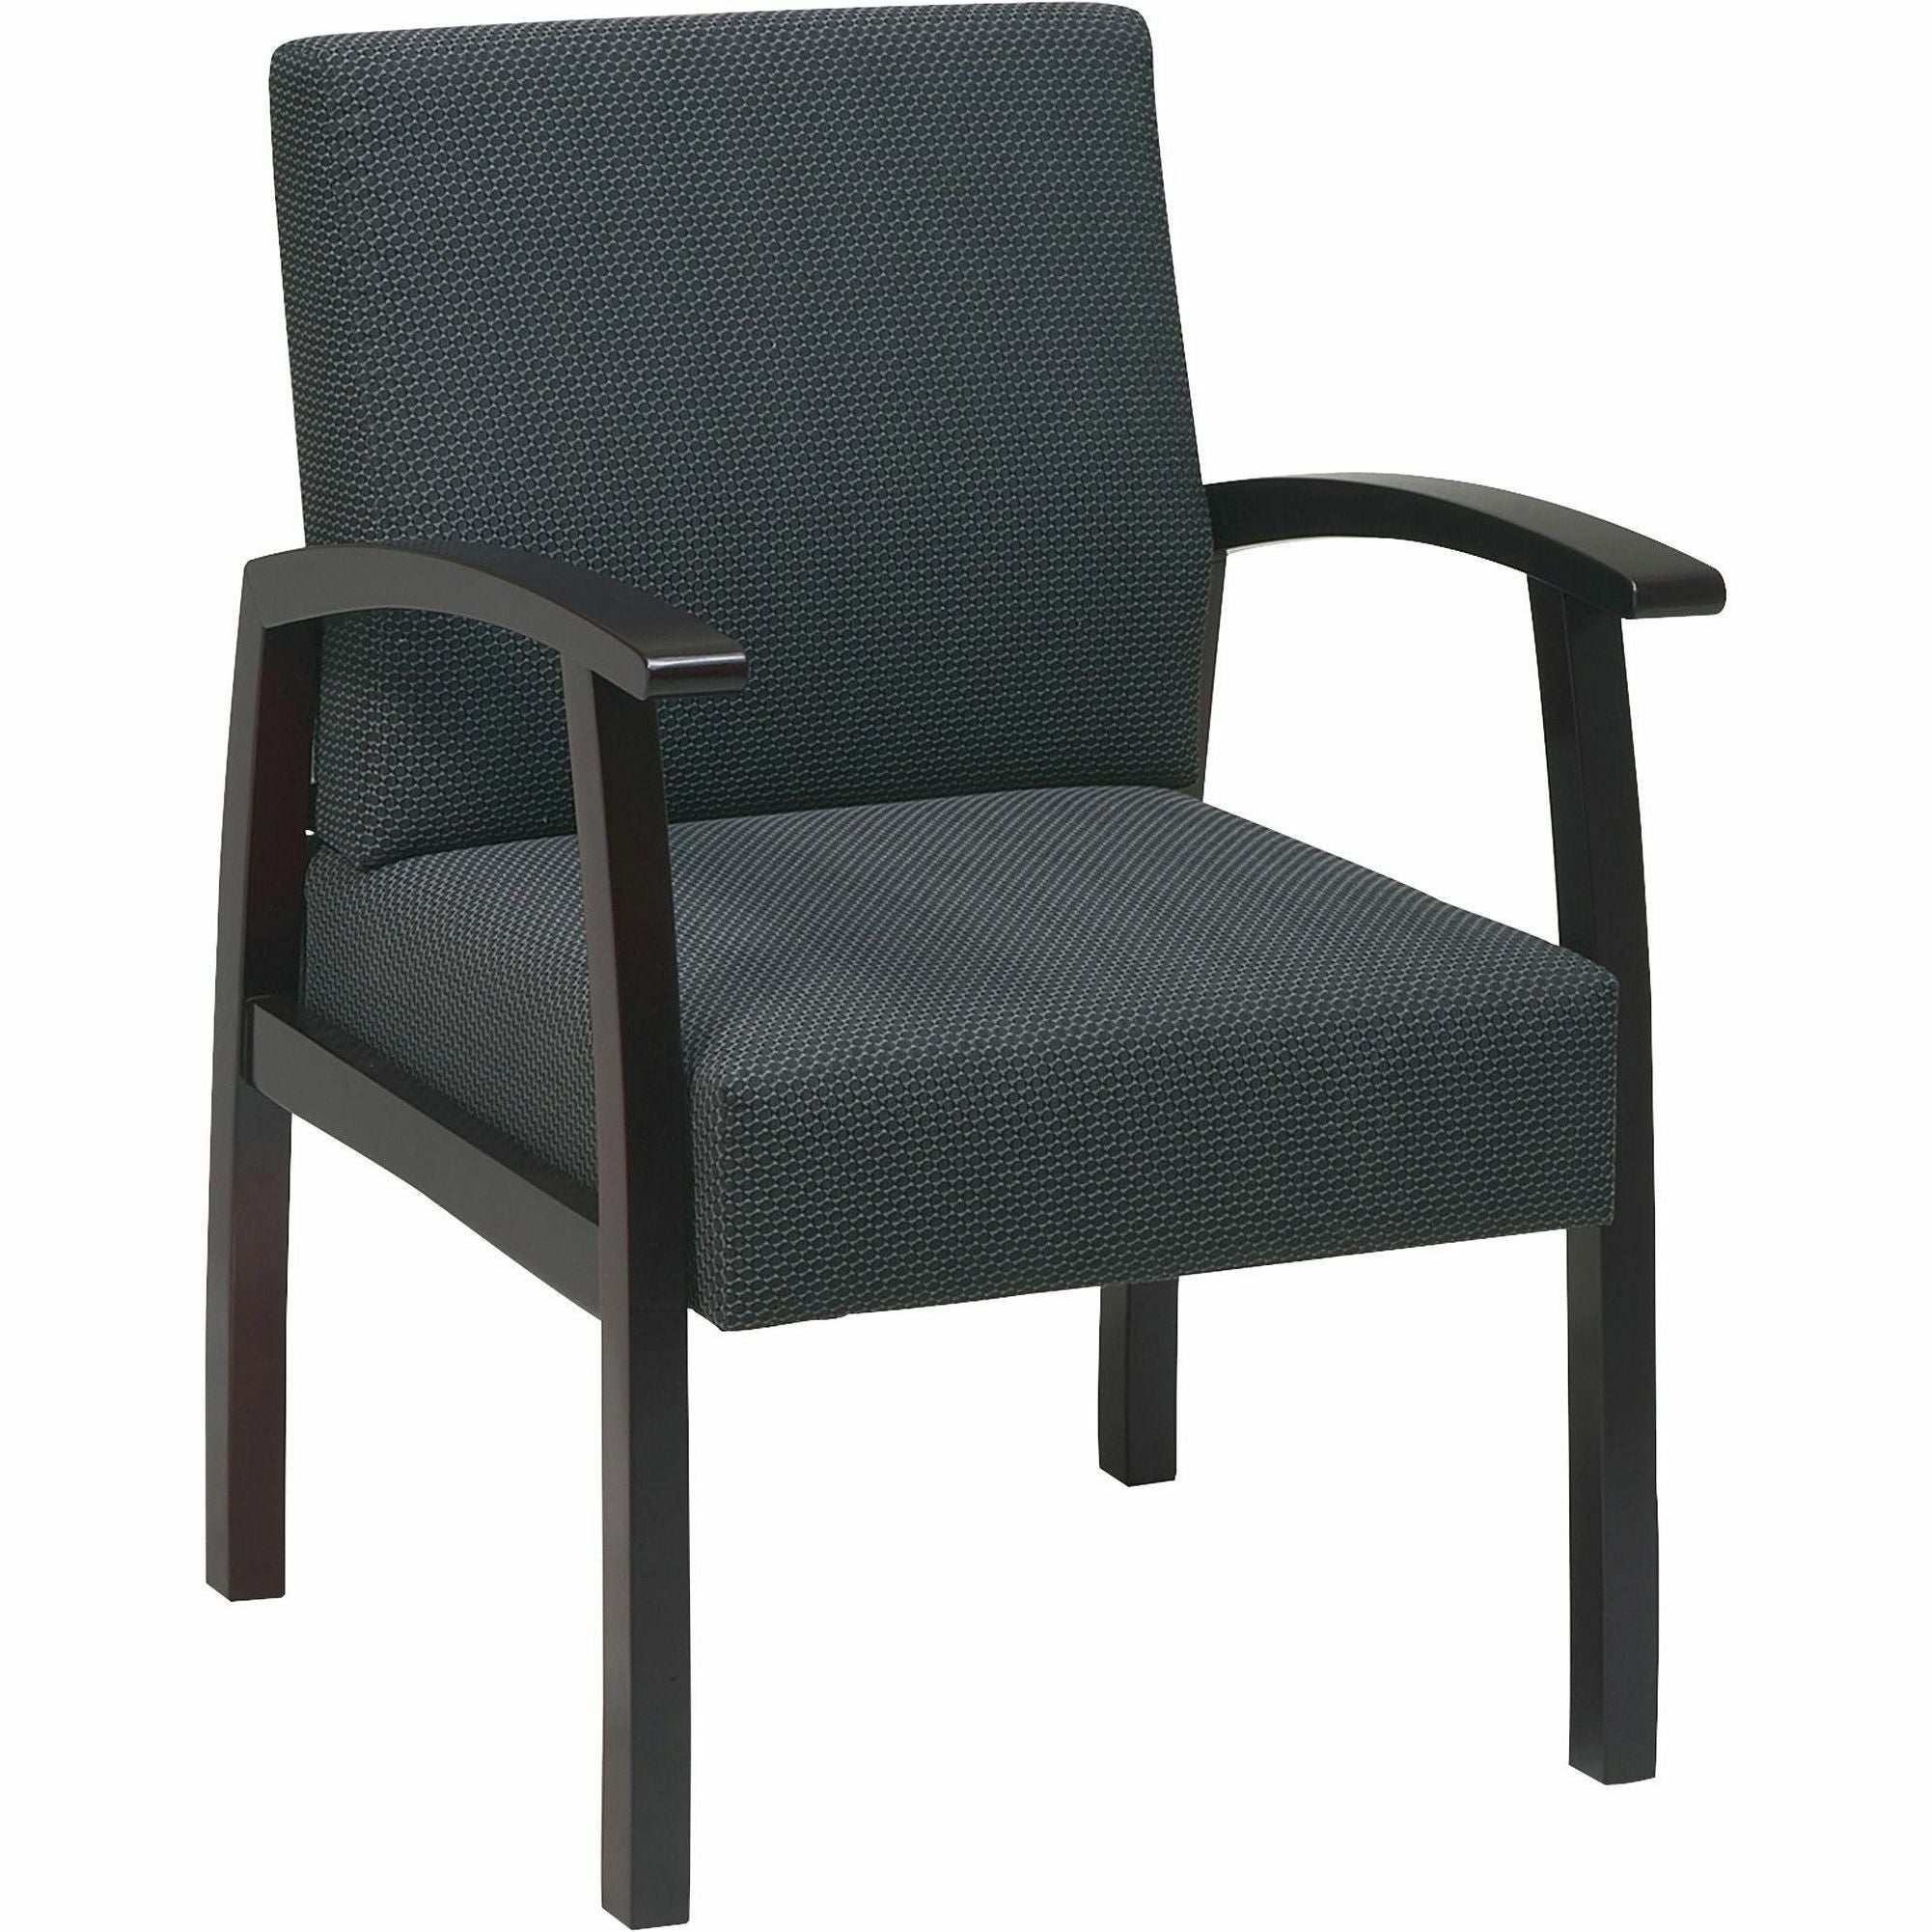 Lorell Thickly Padded Guest Chair - Mahogany Frame - Four-legged Base - Charcoal - 1 Each - 